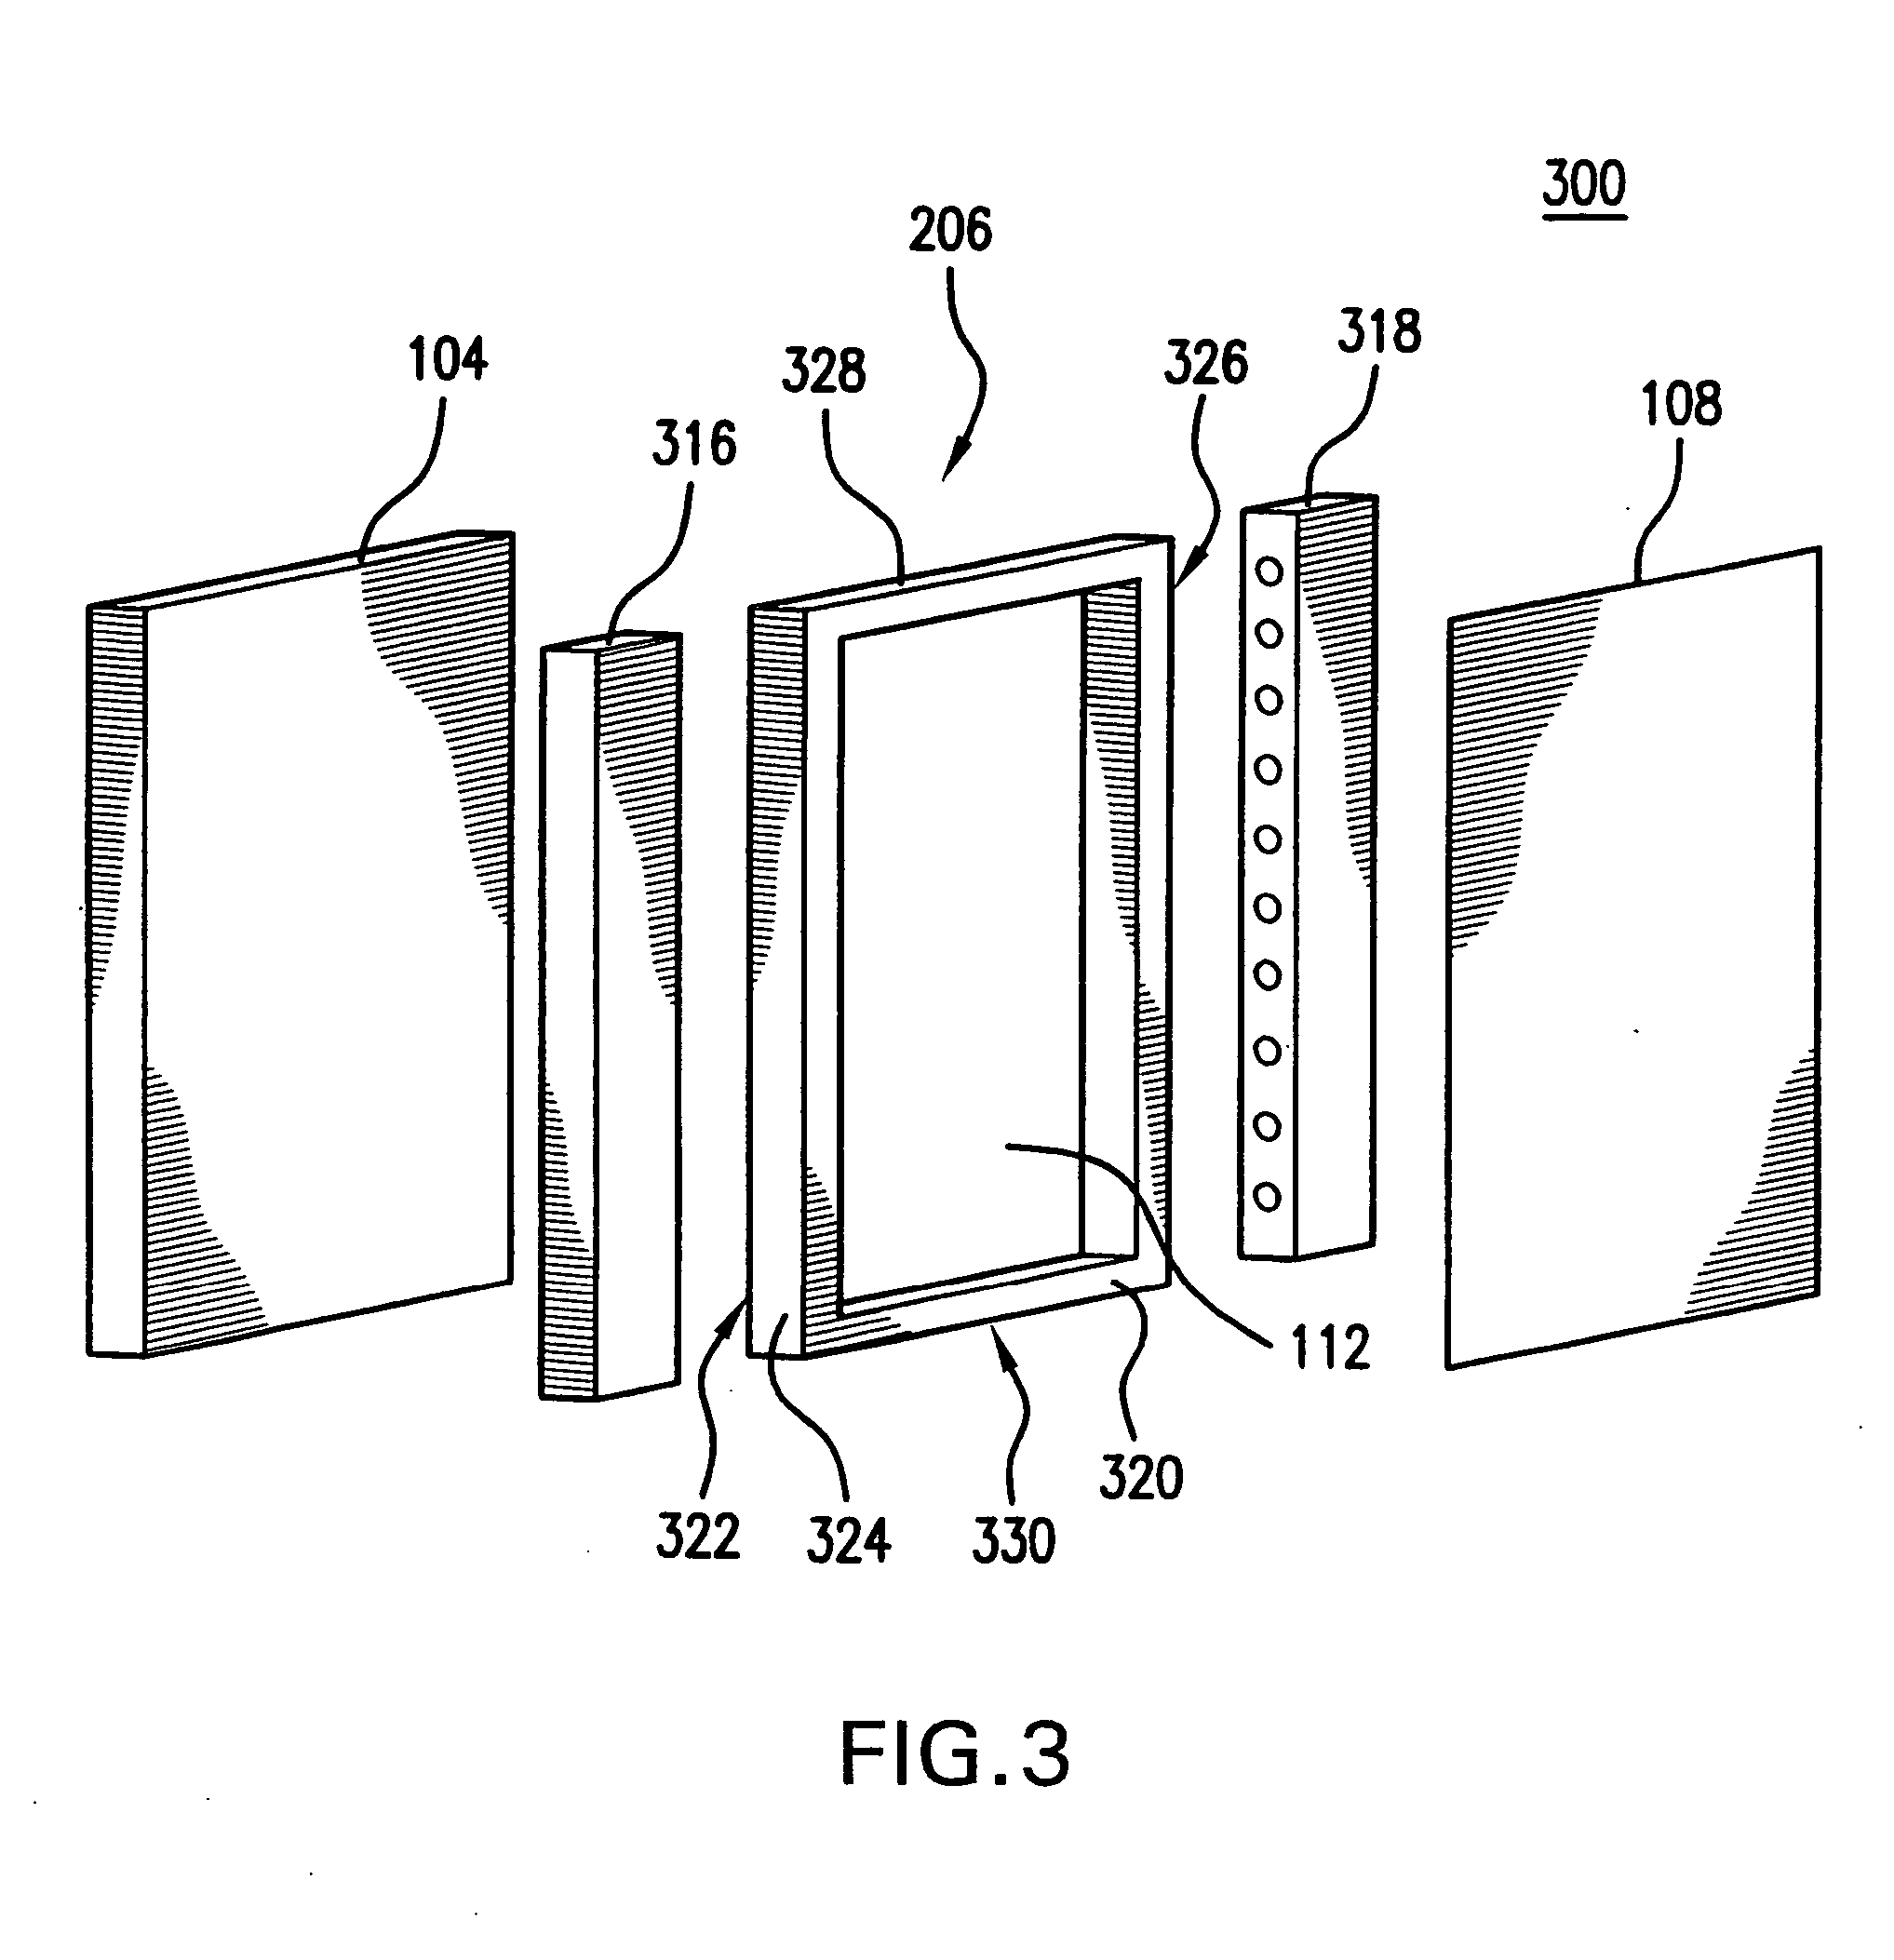 Method and system for a pellicle frame with heightened bonding surfaces (as amended)